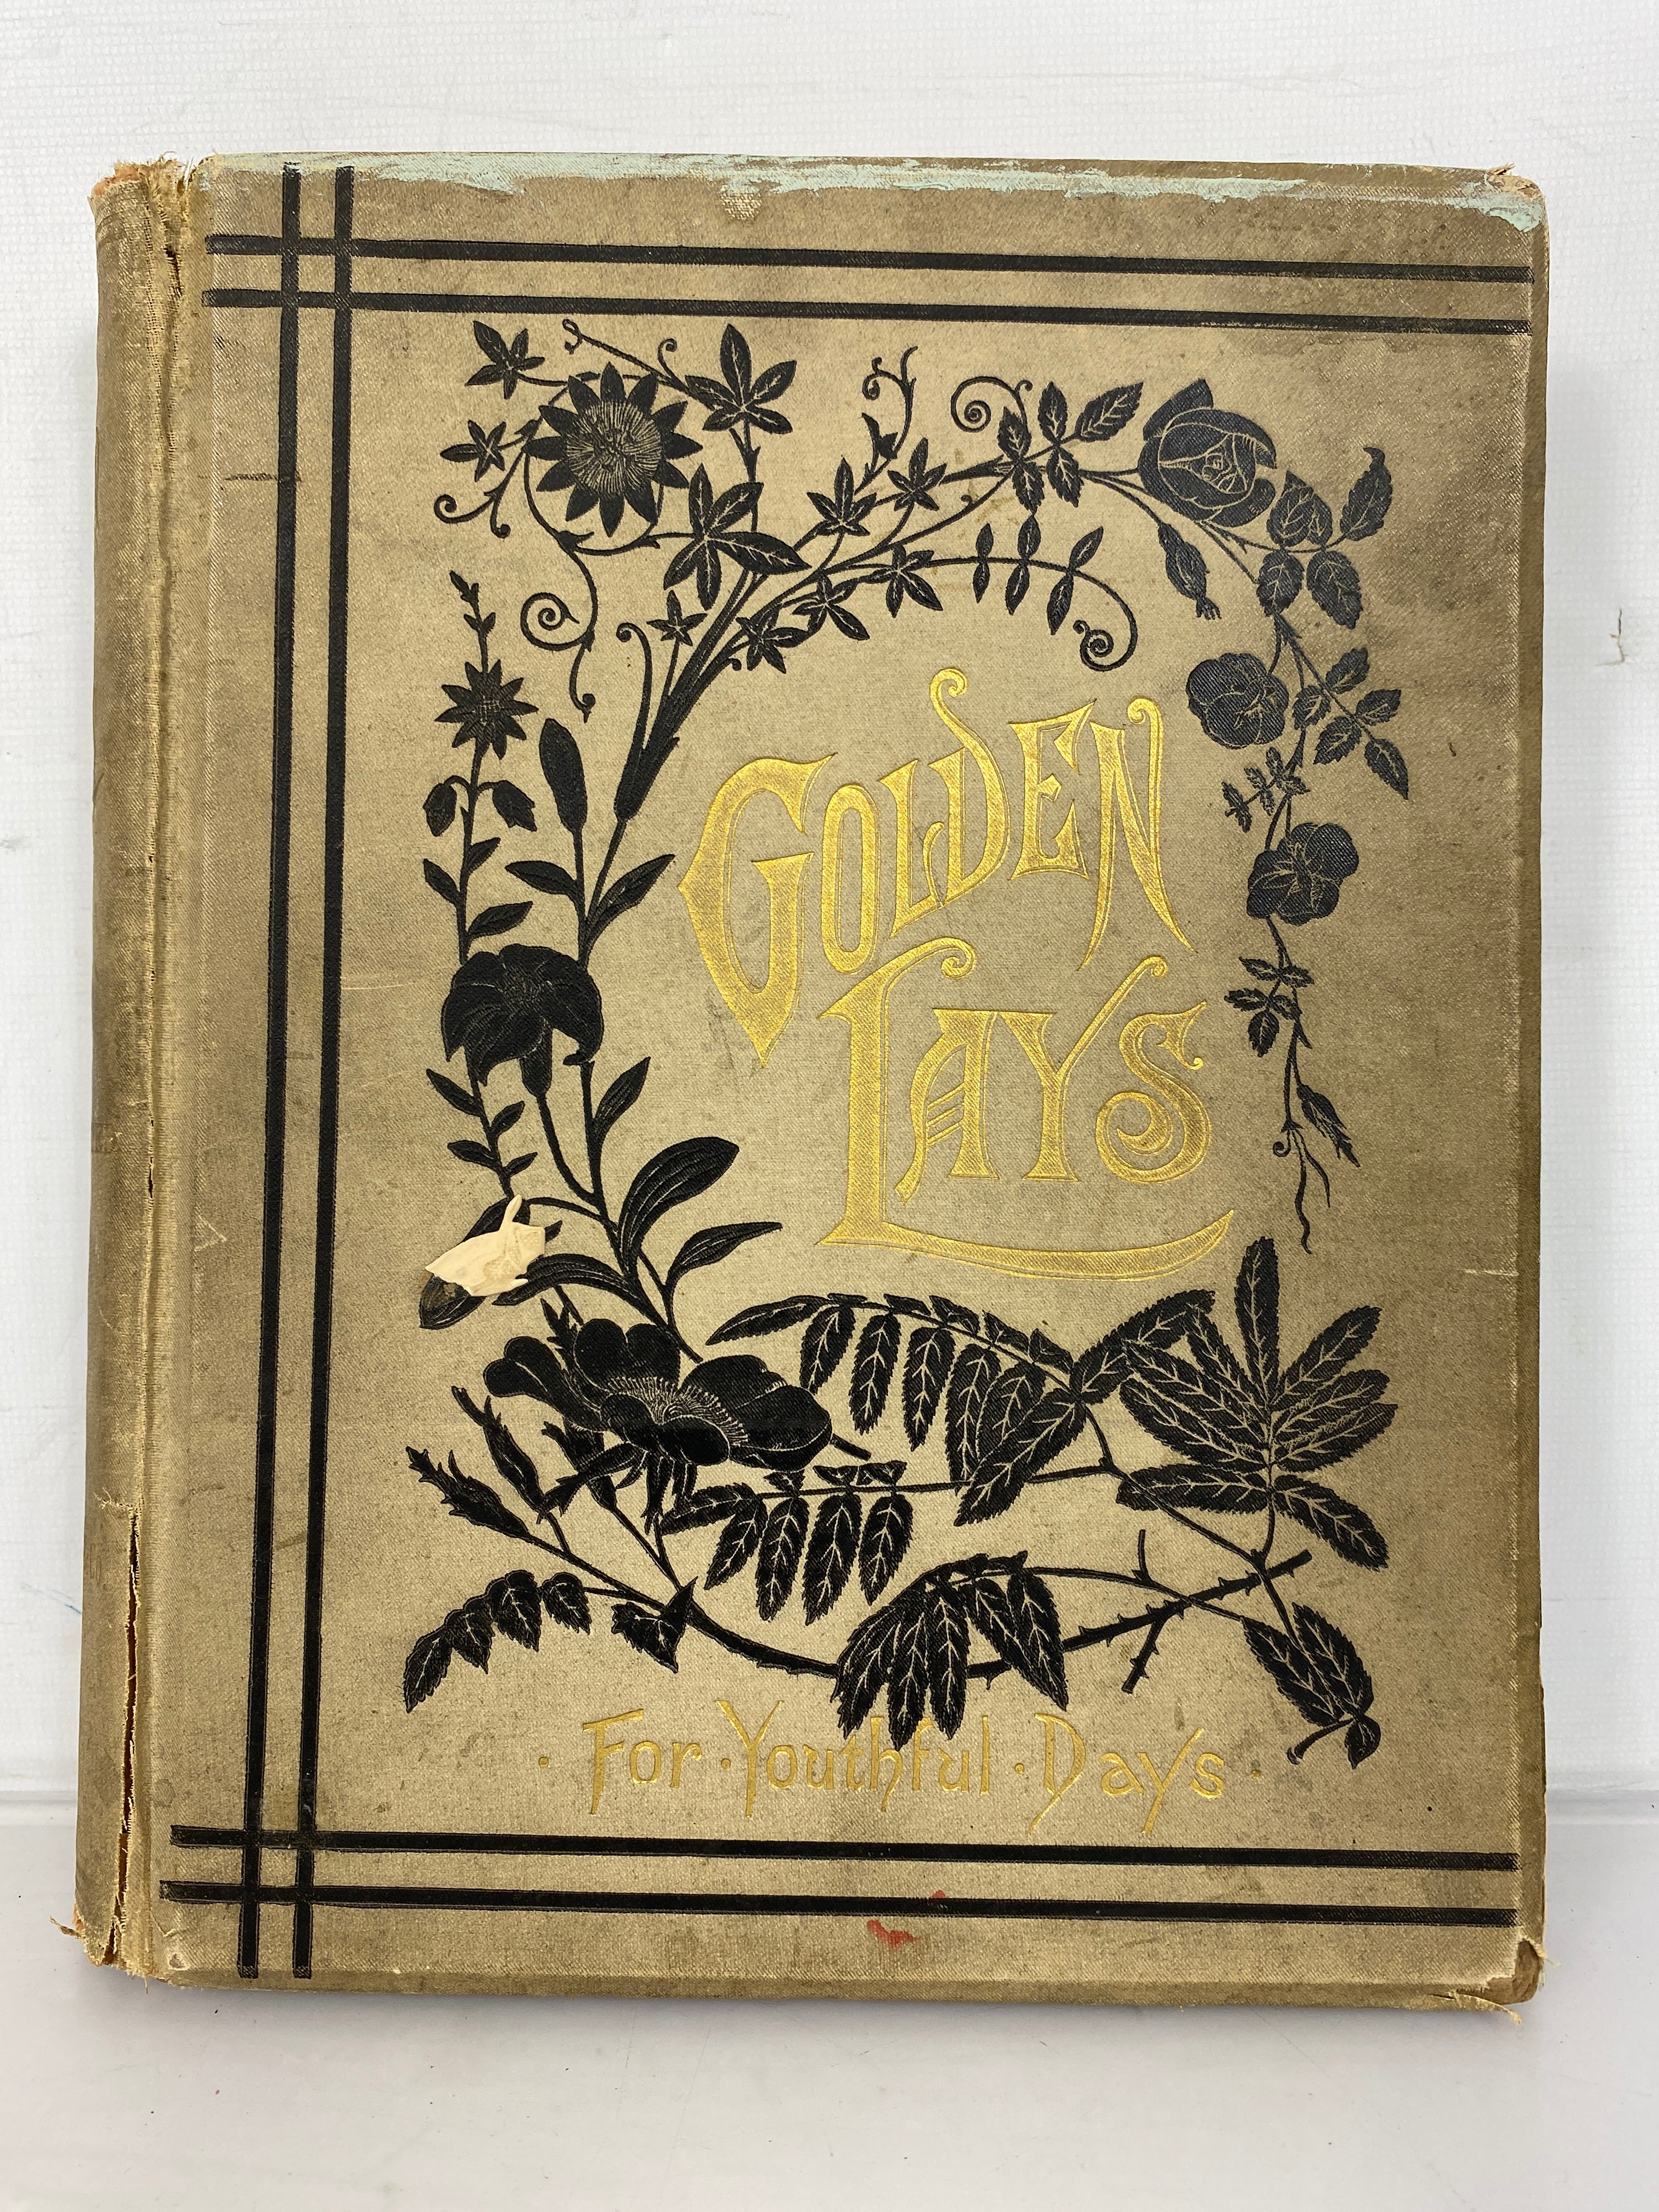 Golden Lays for Youthful Days 1889 Selected Poems From the Best Poets HC